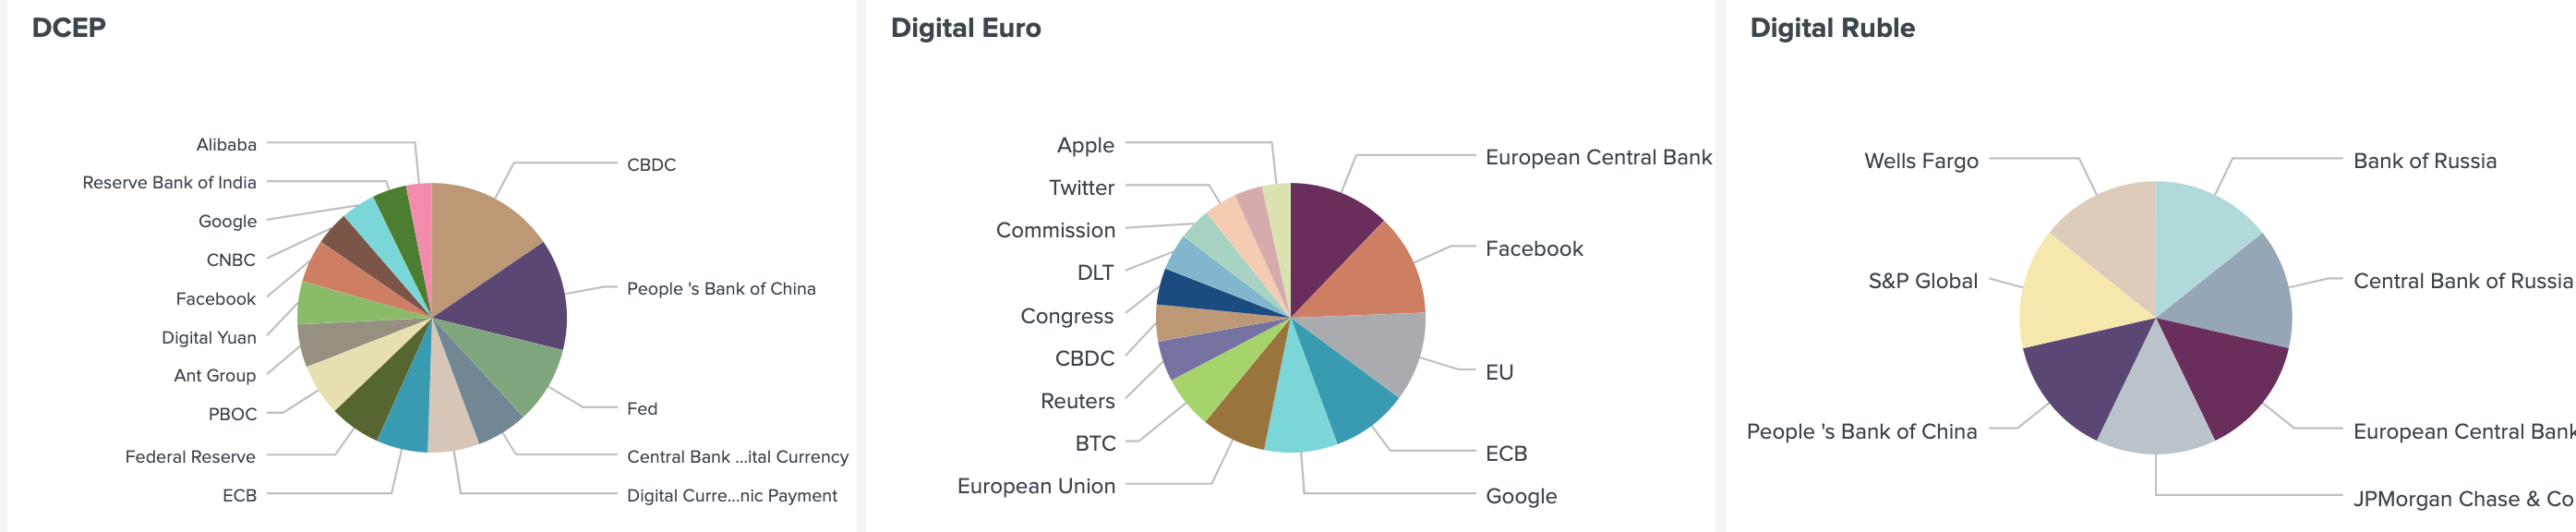 Top DCEP, Digital Euro and Digital Ruble Co-Mentions. Source: <a href="https://inca.digital/products#data">Inca Digital</a>